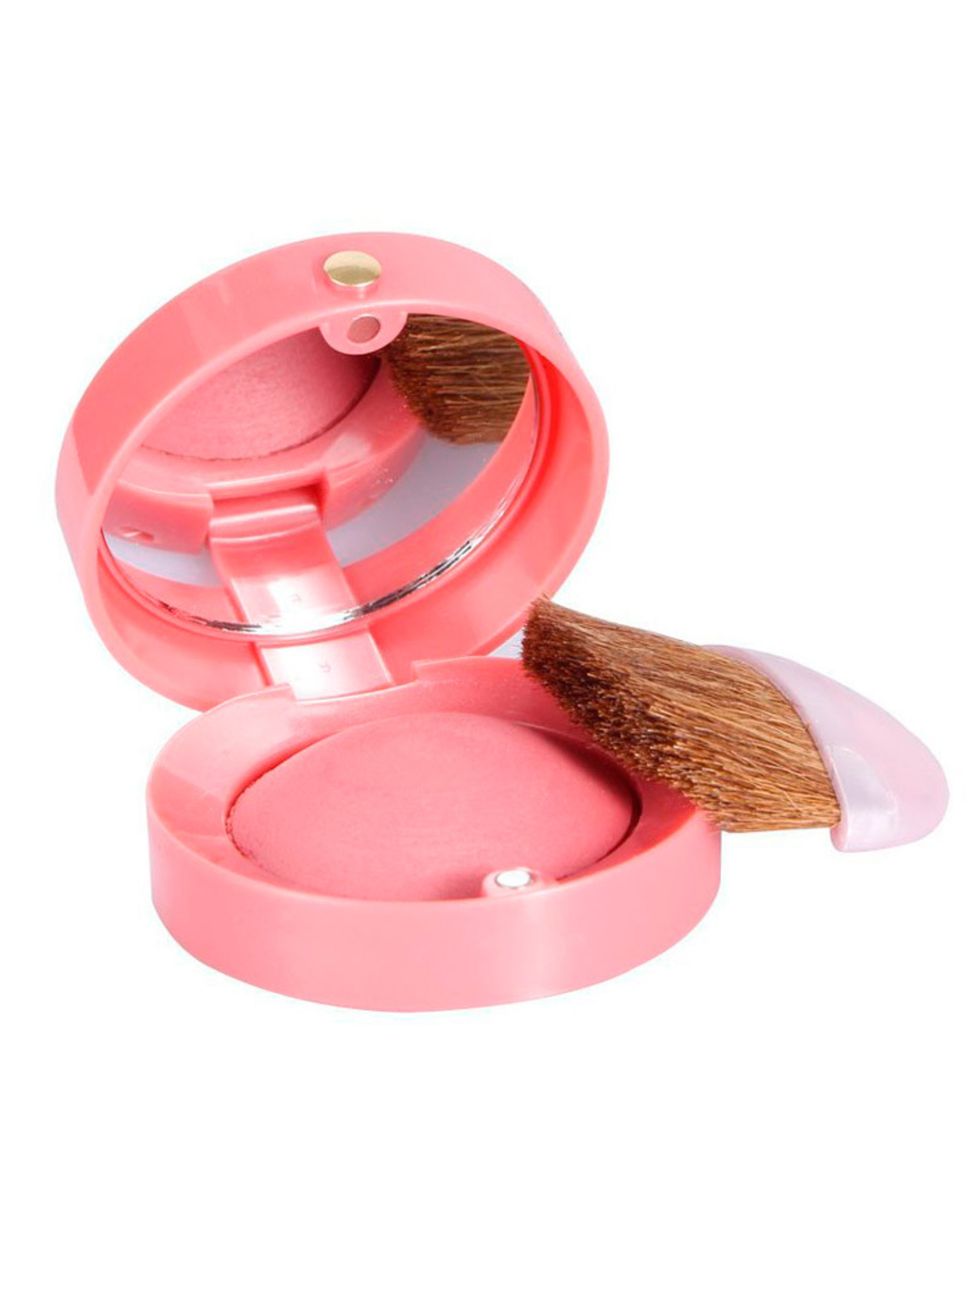 Add a hint of warmth to your cheeks with Bourjois' Little Round Pot Blush in Rose Ambre, £7.99 at Boots.